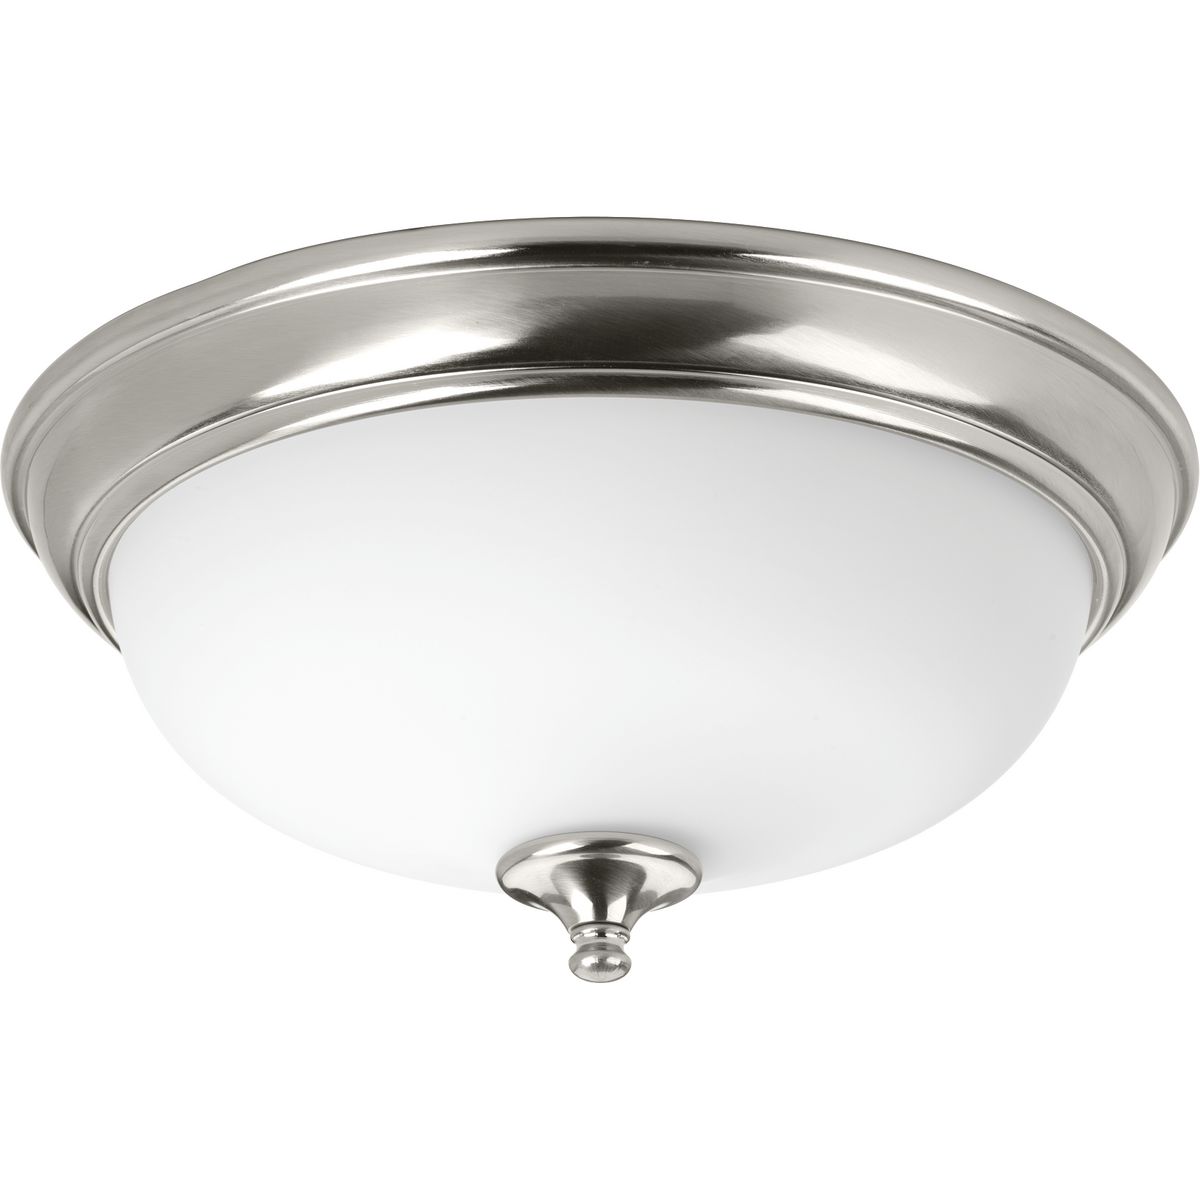 One-light 15 inch LED Flush Mount in Brushed Nickel features an etched Alabaster glass bowl. Fixtures are dimmable to 10 percent with Triac, phase forward or ELV dimmers. 3000K and 90 CRI.